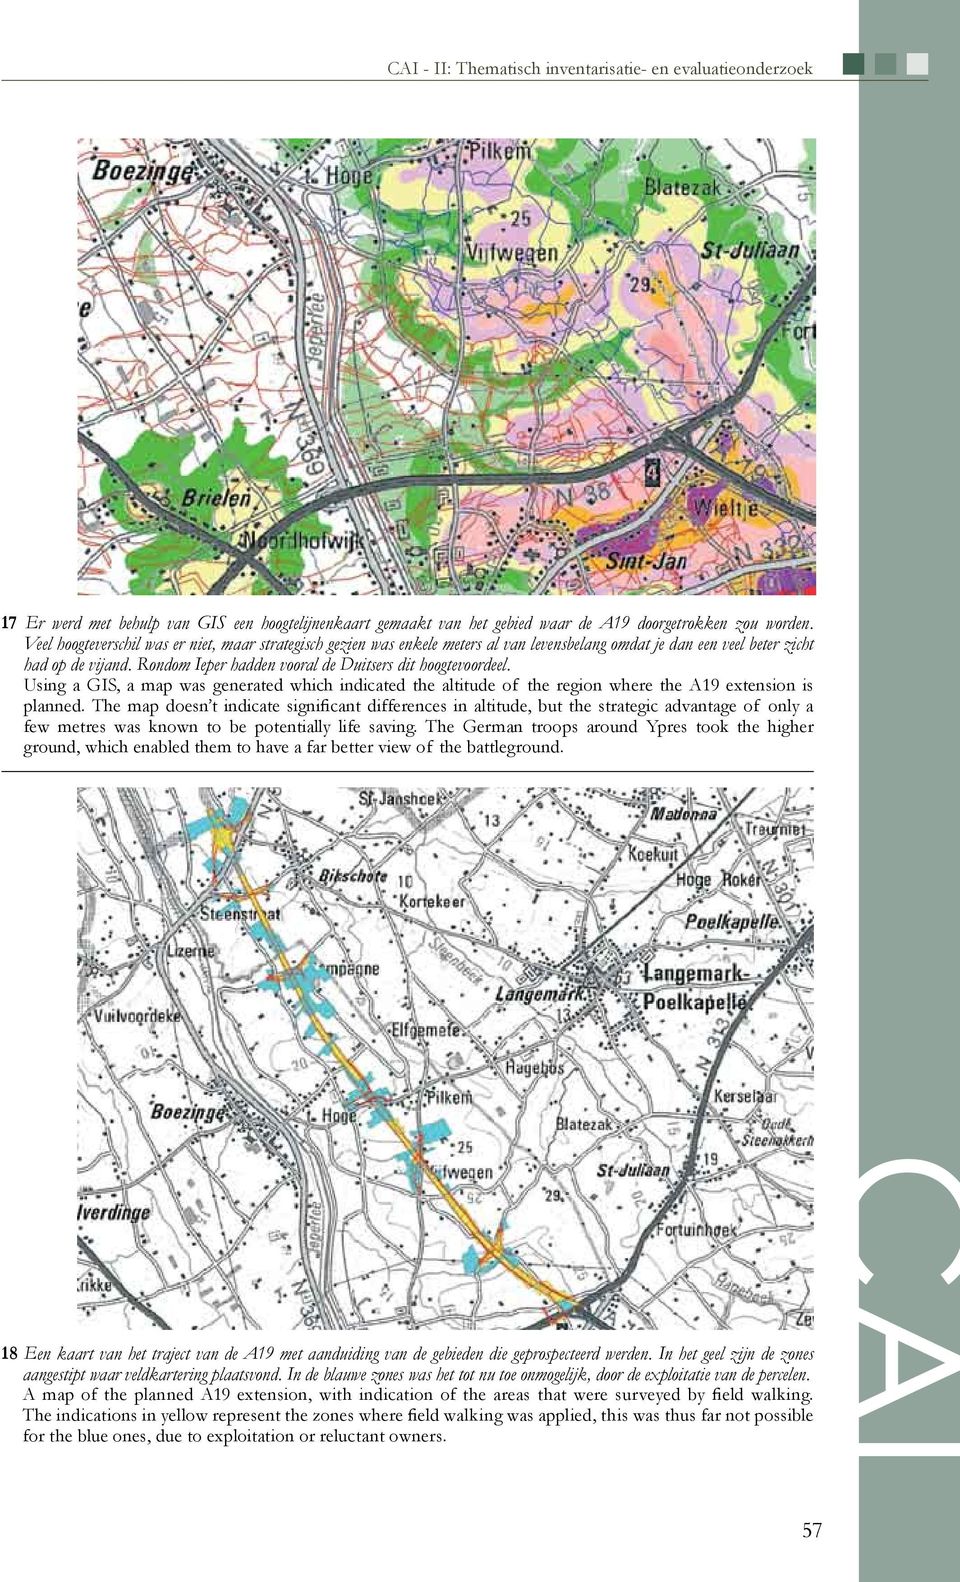 Rondom Ieper hadden vooral de Duitsers dit hoogtevoordeel. Using a GIS, a map was generated which indicated the altitude of the region where the A19 extension is planned.